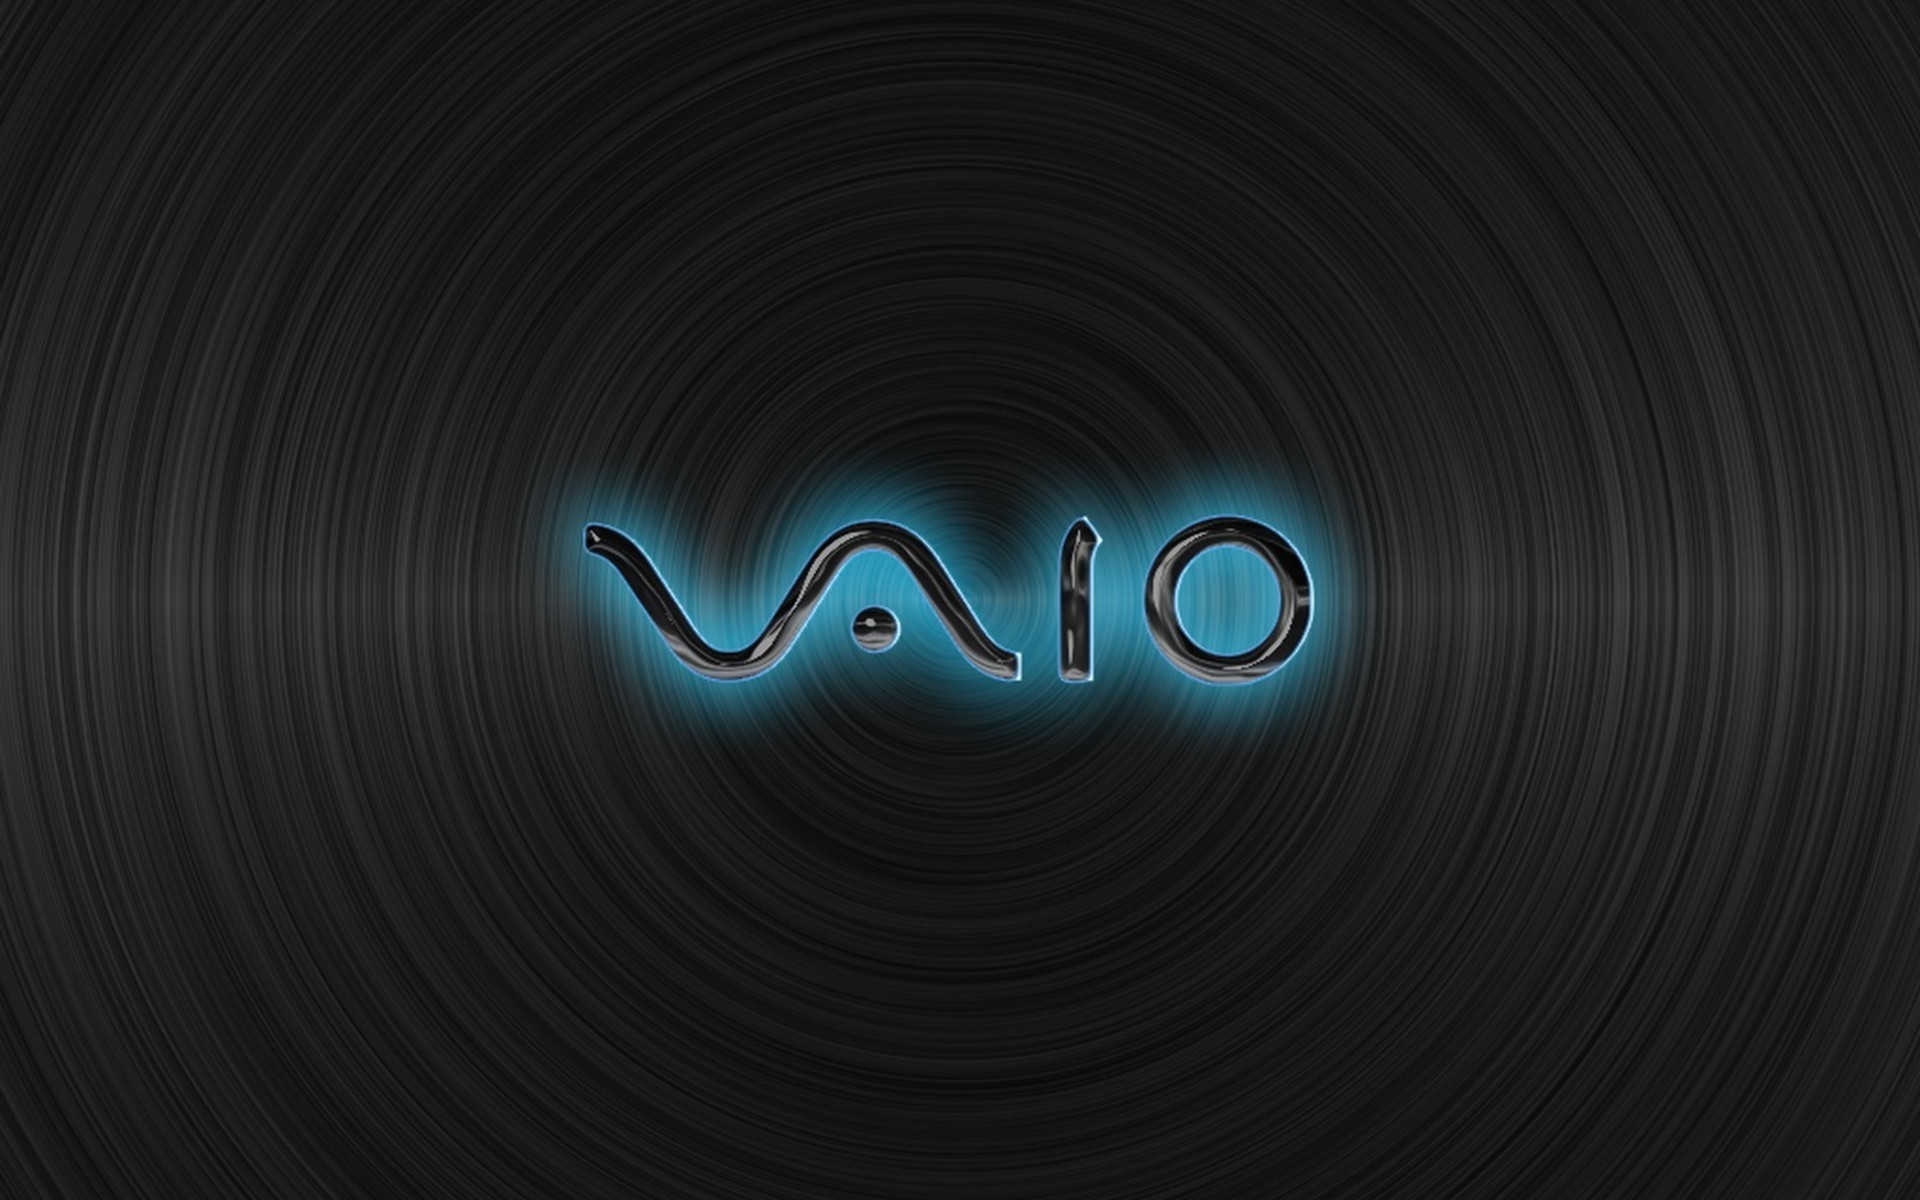 Desktop Wallpaper on Tags Sony Vaio Category General This Free Desktop Wallpaper Has Been